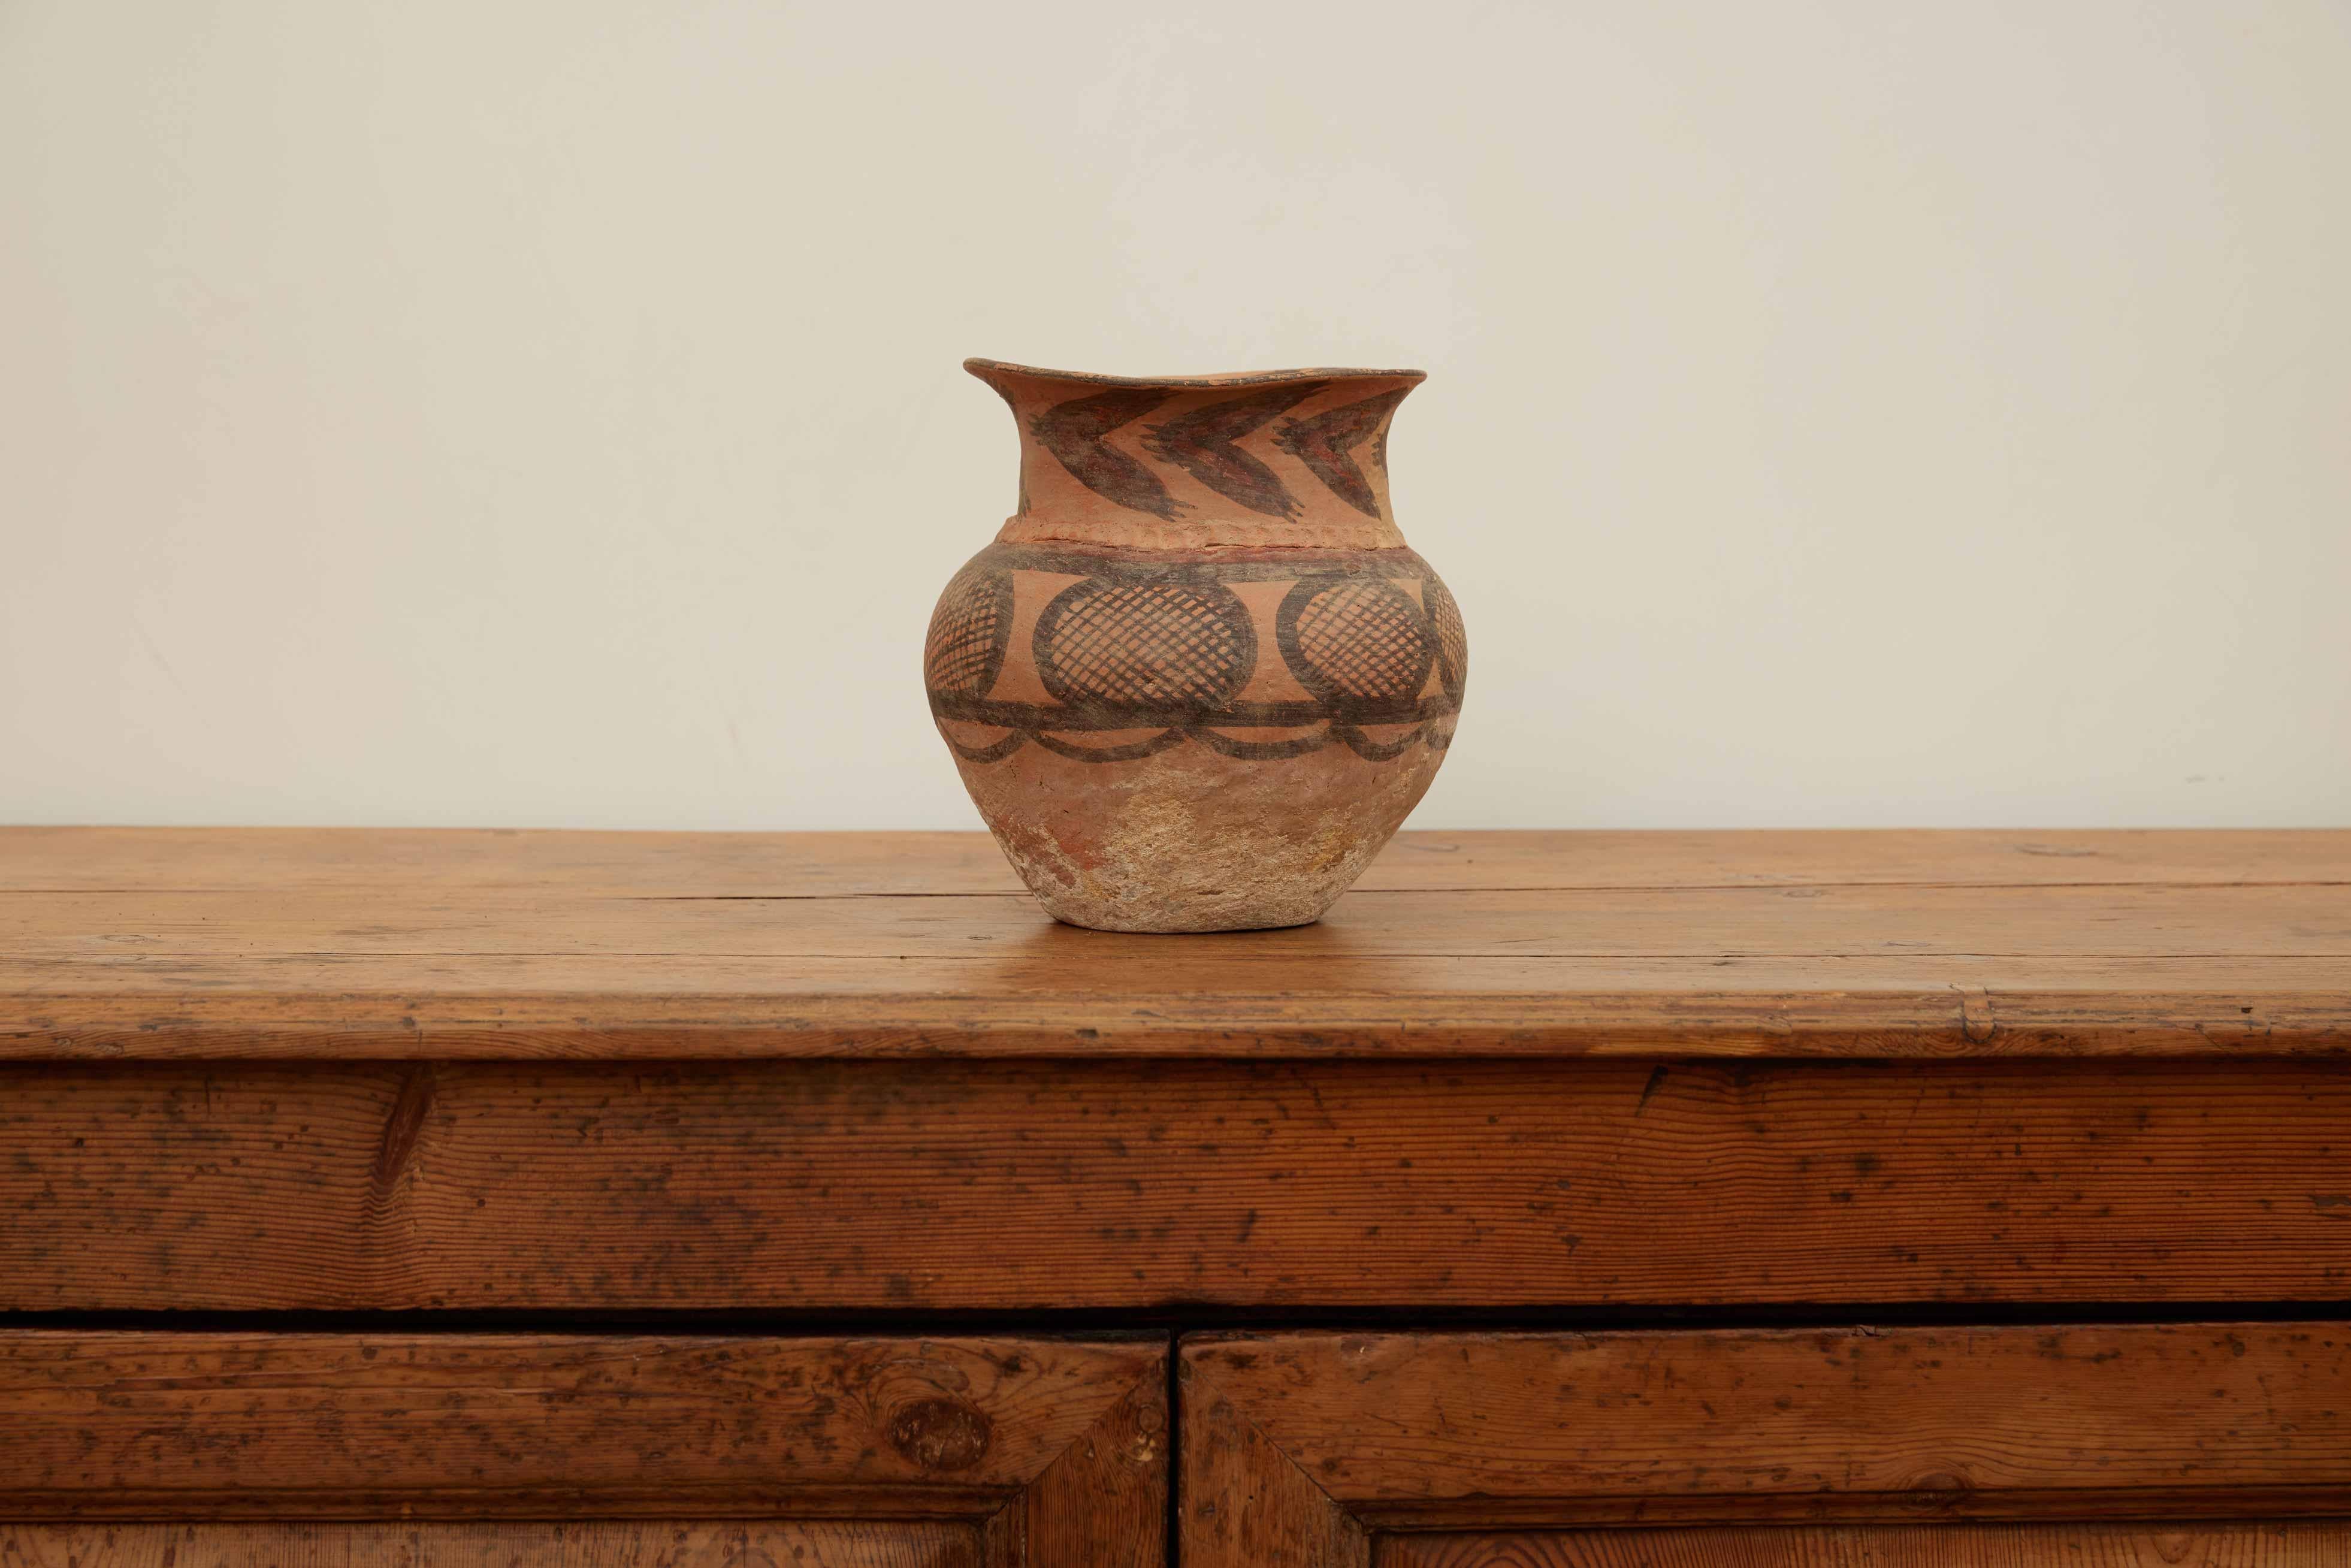 Chinese Neolithic Period Vase

Chinese pottery, objects made of clay and hardened by heat: earthenware, stoneware, and porcelain, particularly those made in China. Nowhere in the world has pottery assumed such importance as in China, and the